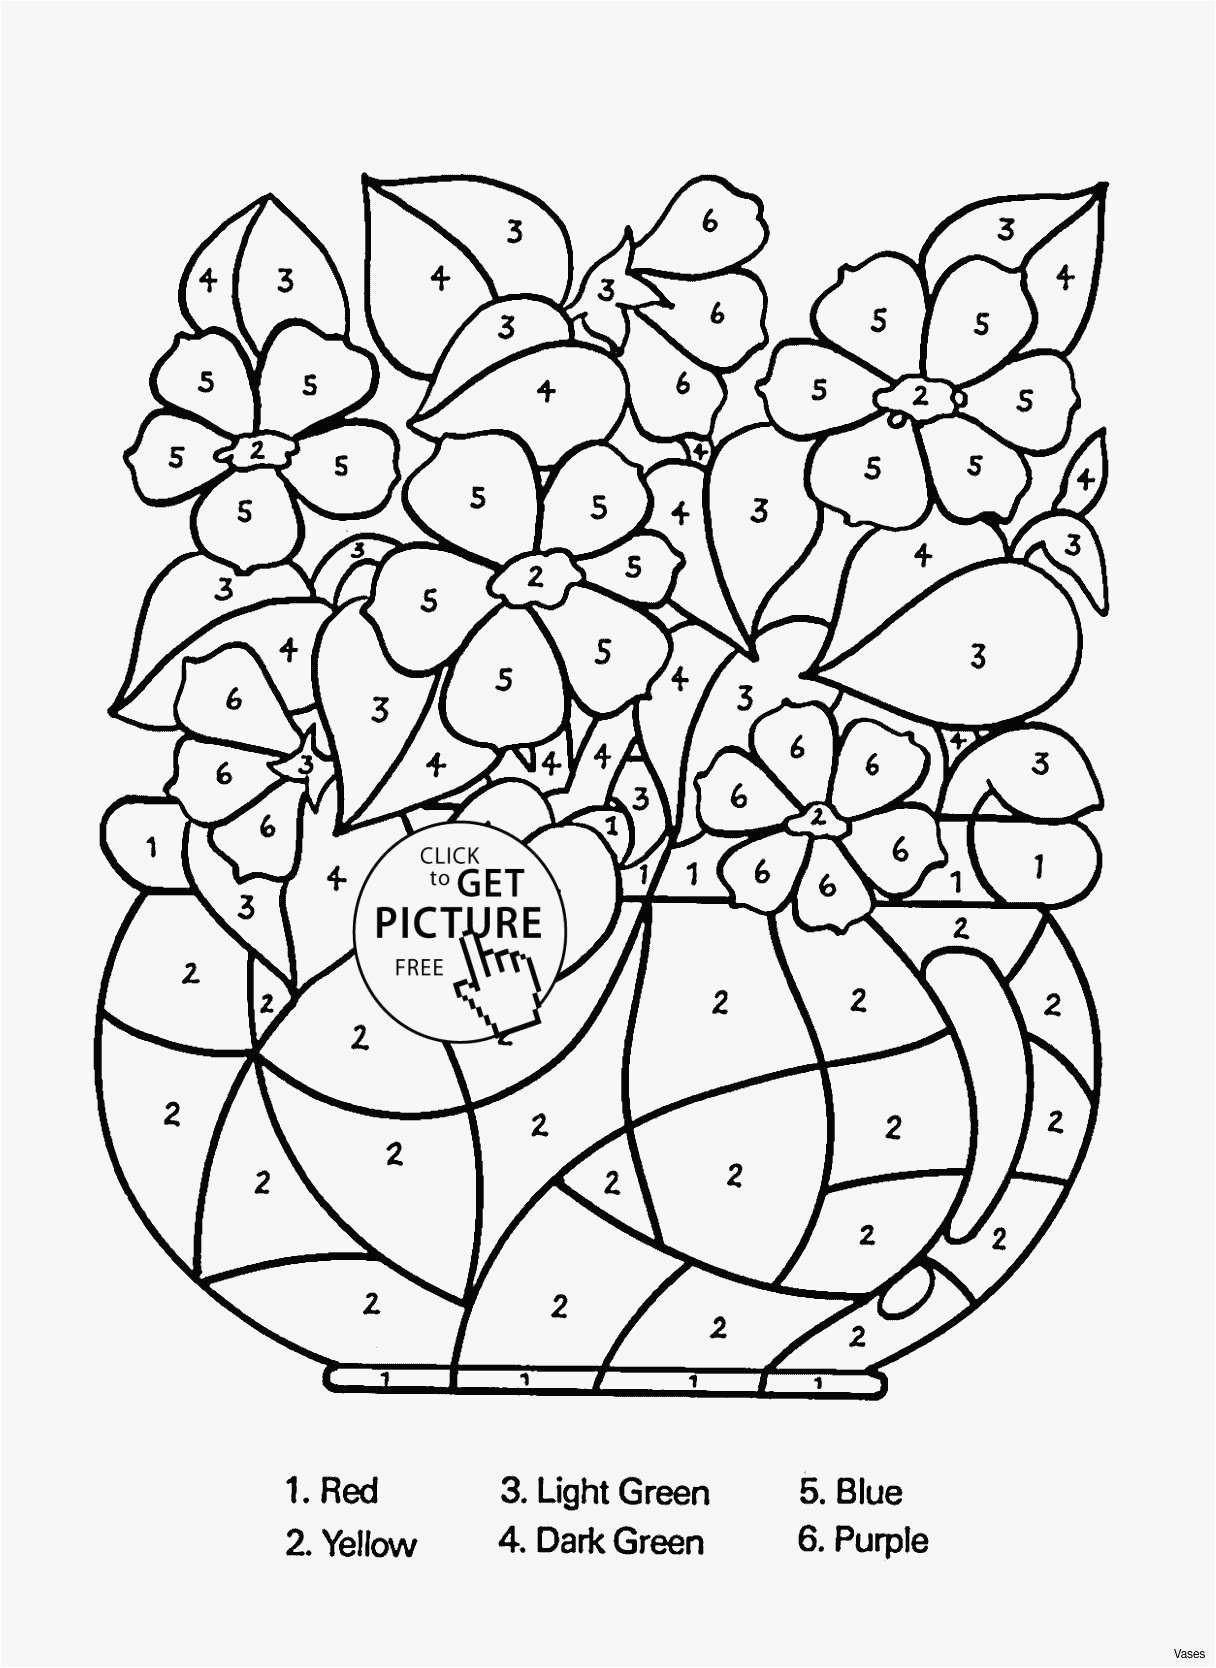 30 Famous Vase In Spanish 2024 free download vase in spanish of 23 free christian coloring pages example best coloring pages picture inside design pictures to color vases flower vase coloring page pages flowers in a top i 0d